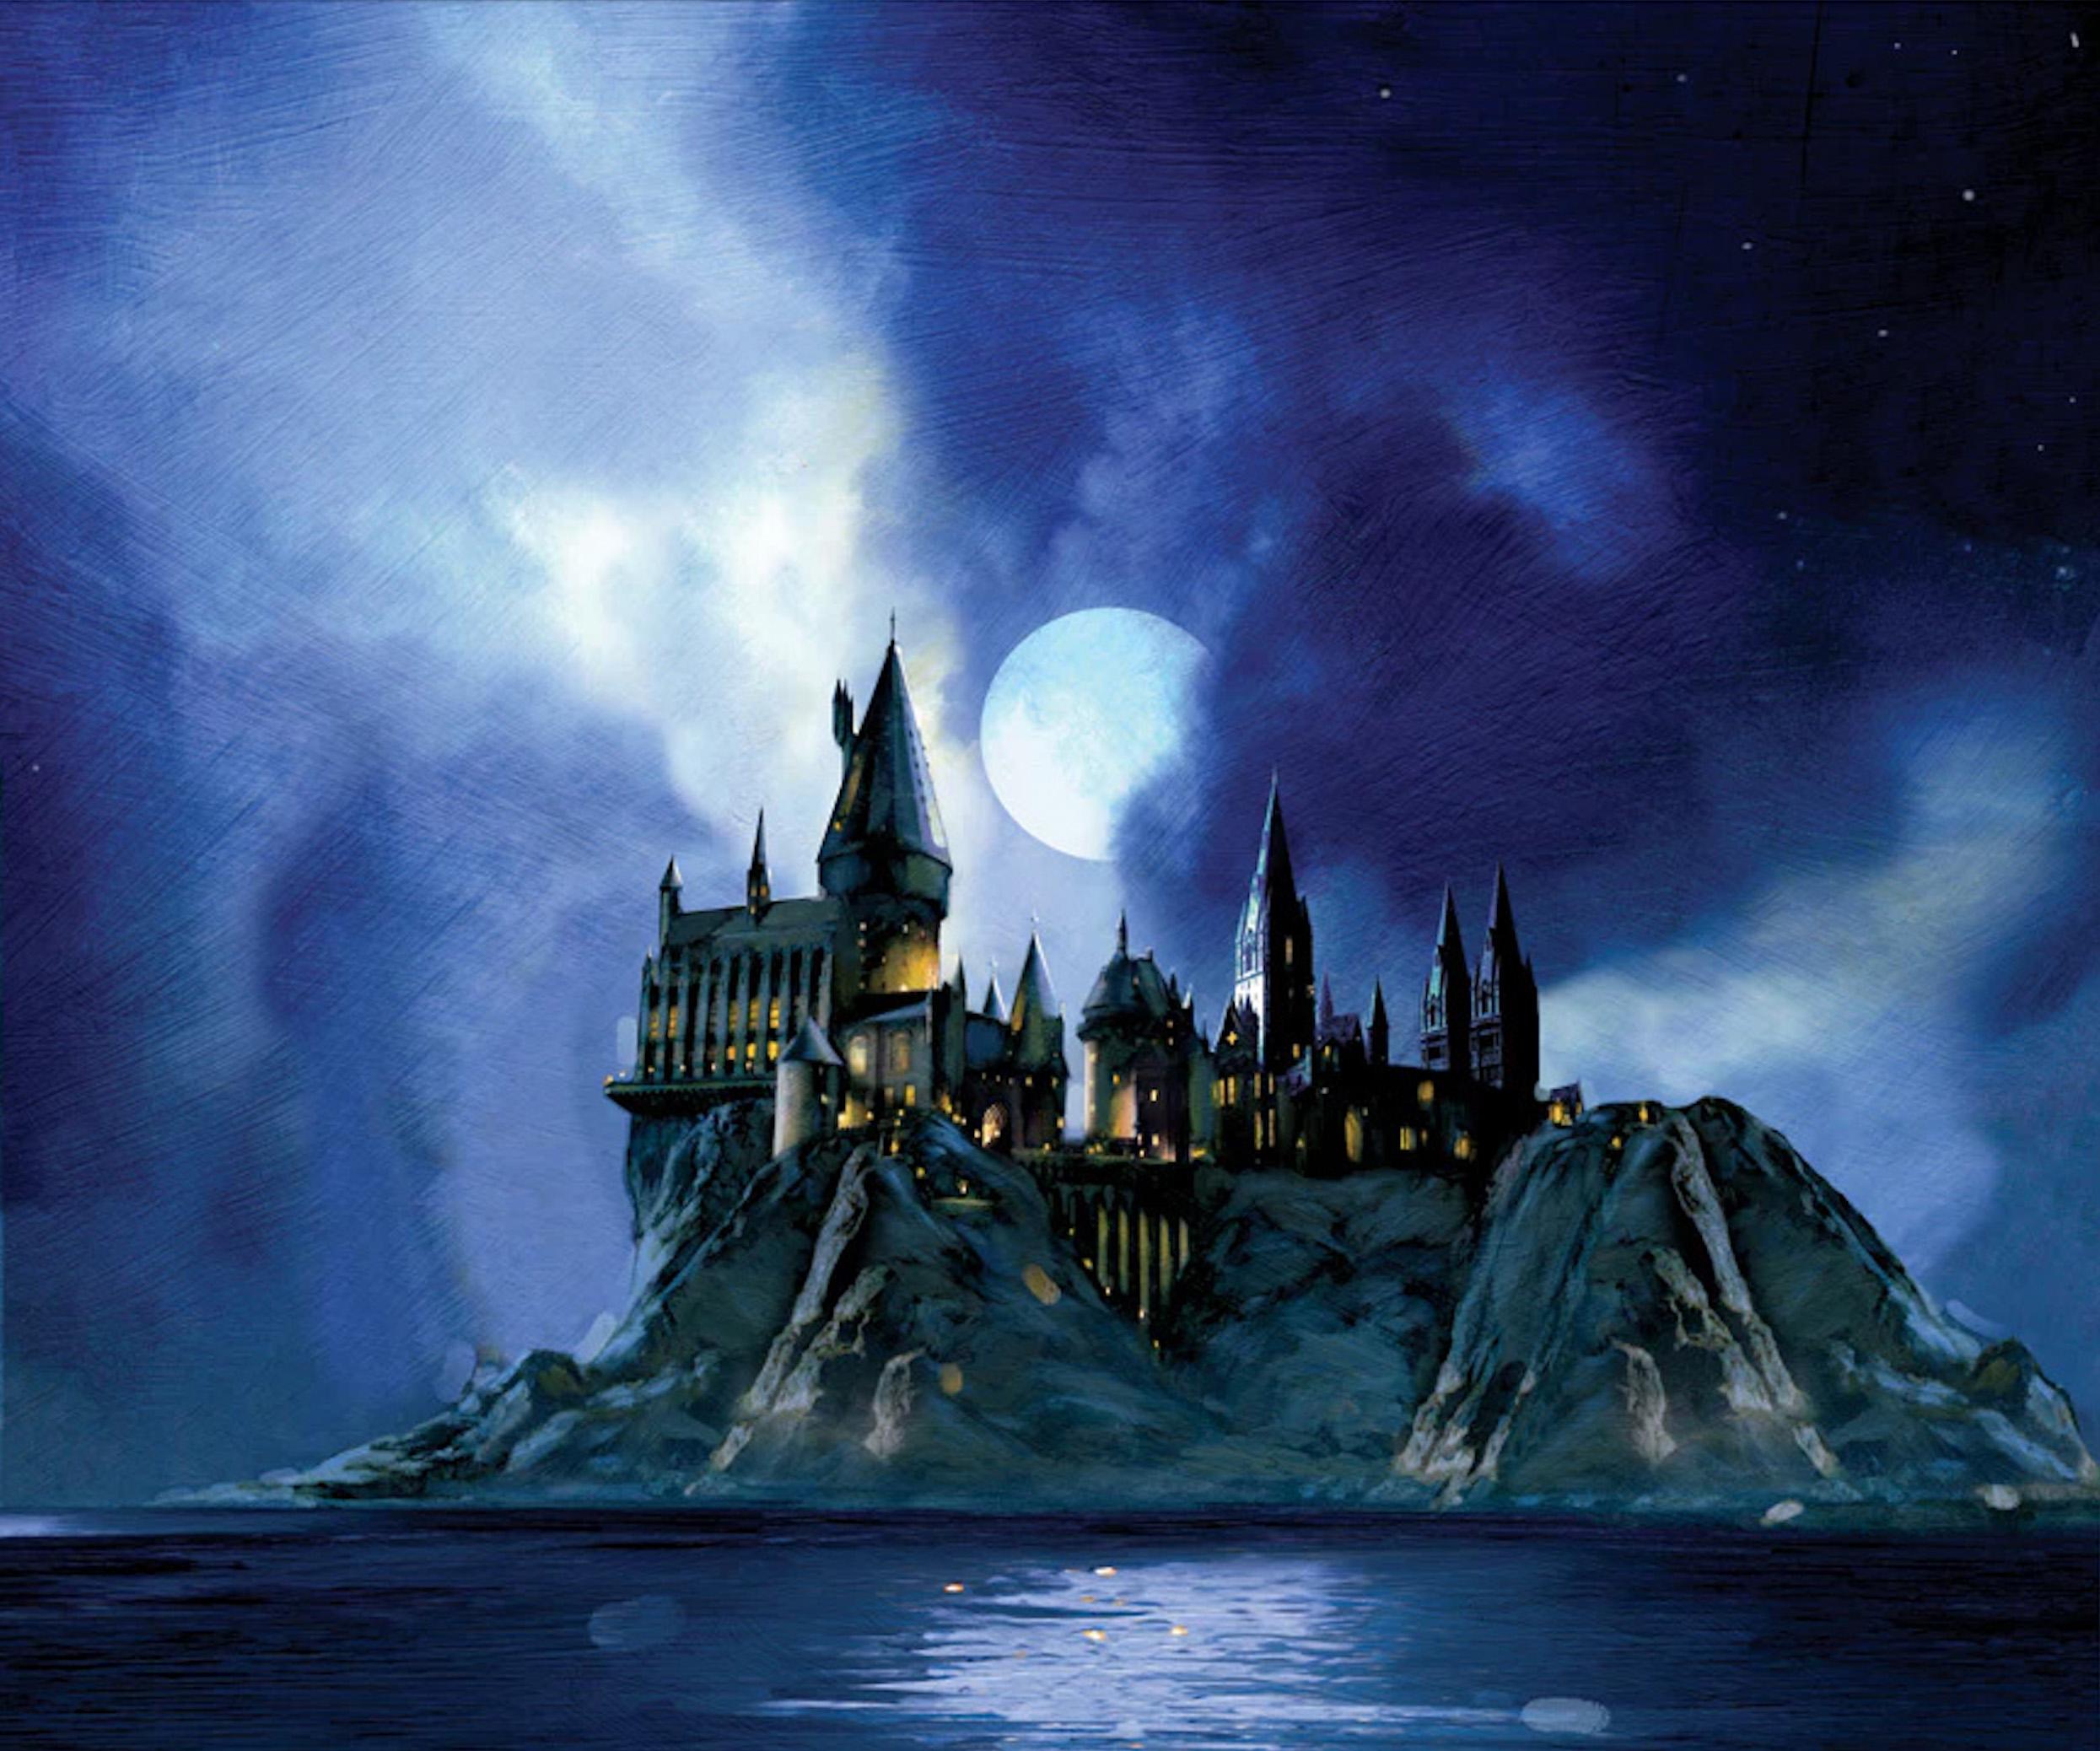 ARTIST: Jim Salvati
MEDIUM: Gicleé on Canvas
EDITION SIZE: 100
SIZE: 21.75” x 25.75”
SIGNED BY: Jim Salvati
SKU: CP1352D

Artist Jim Salvati was brought on board for Harry Potter films three and four, where he was assigned to develop paintings in